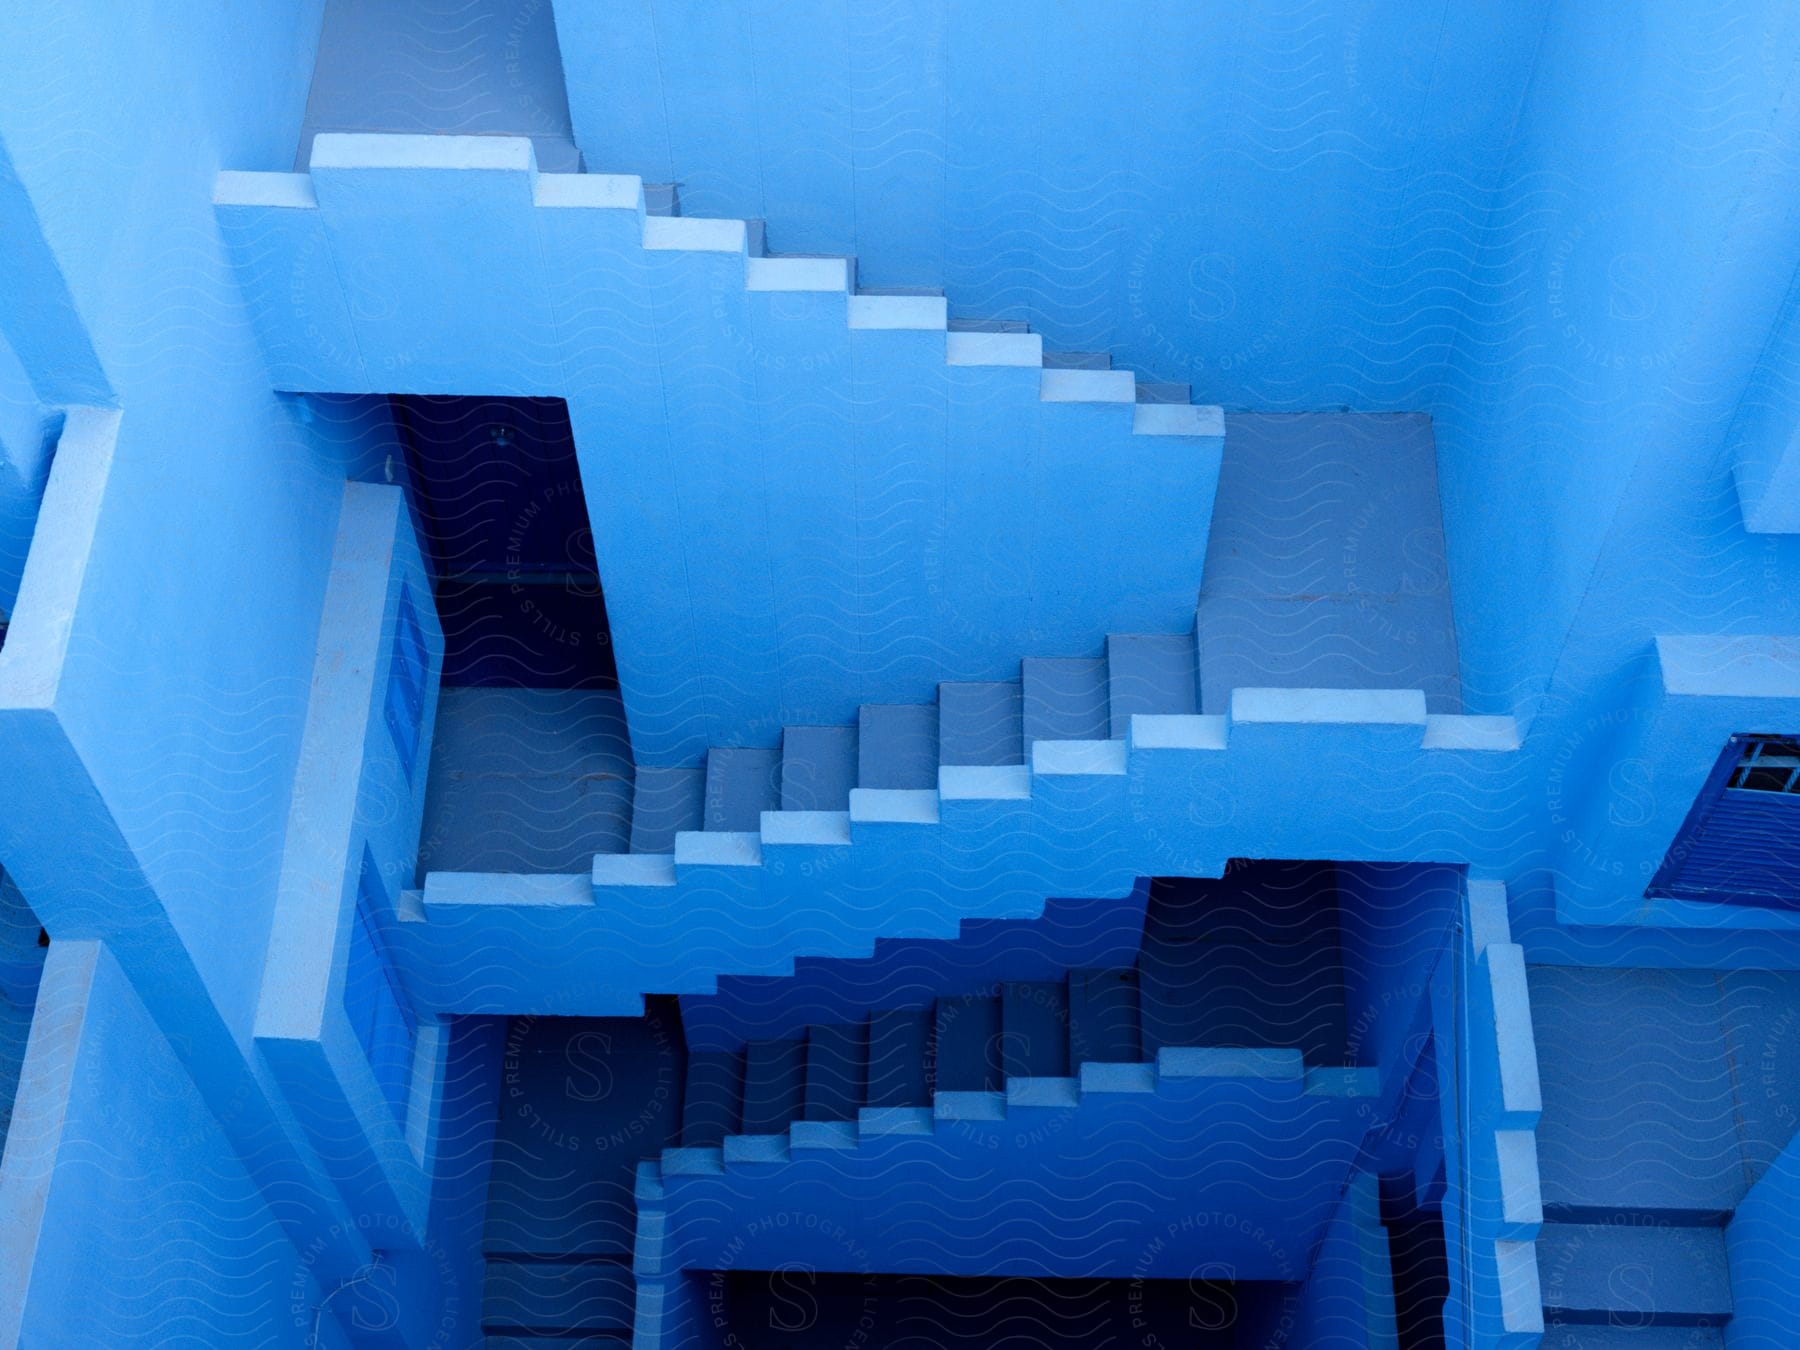 A bluepainted stairwell spanning multiple floors of a building